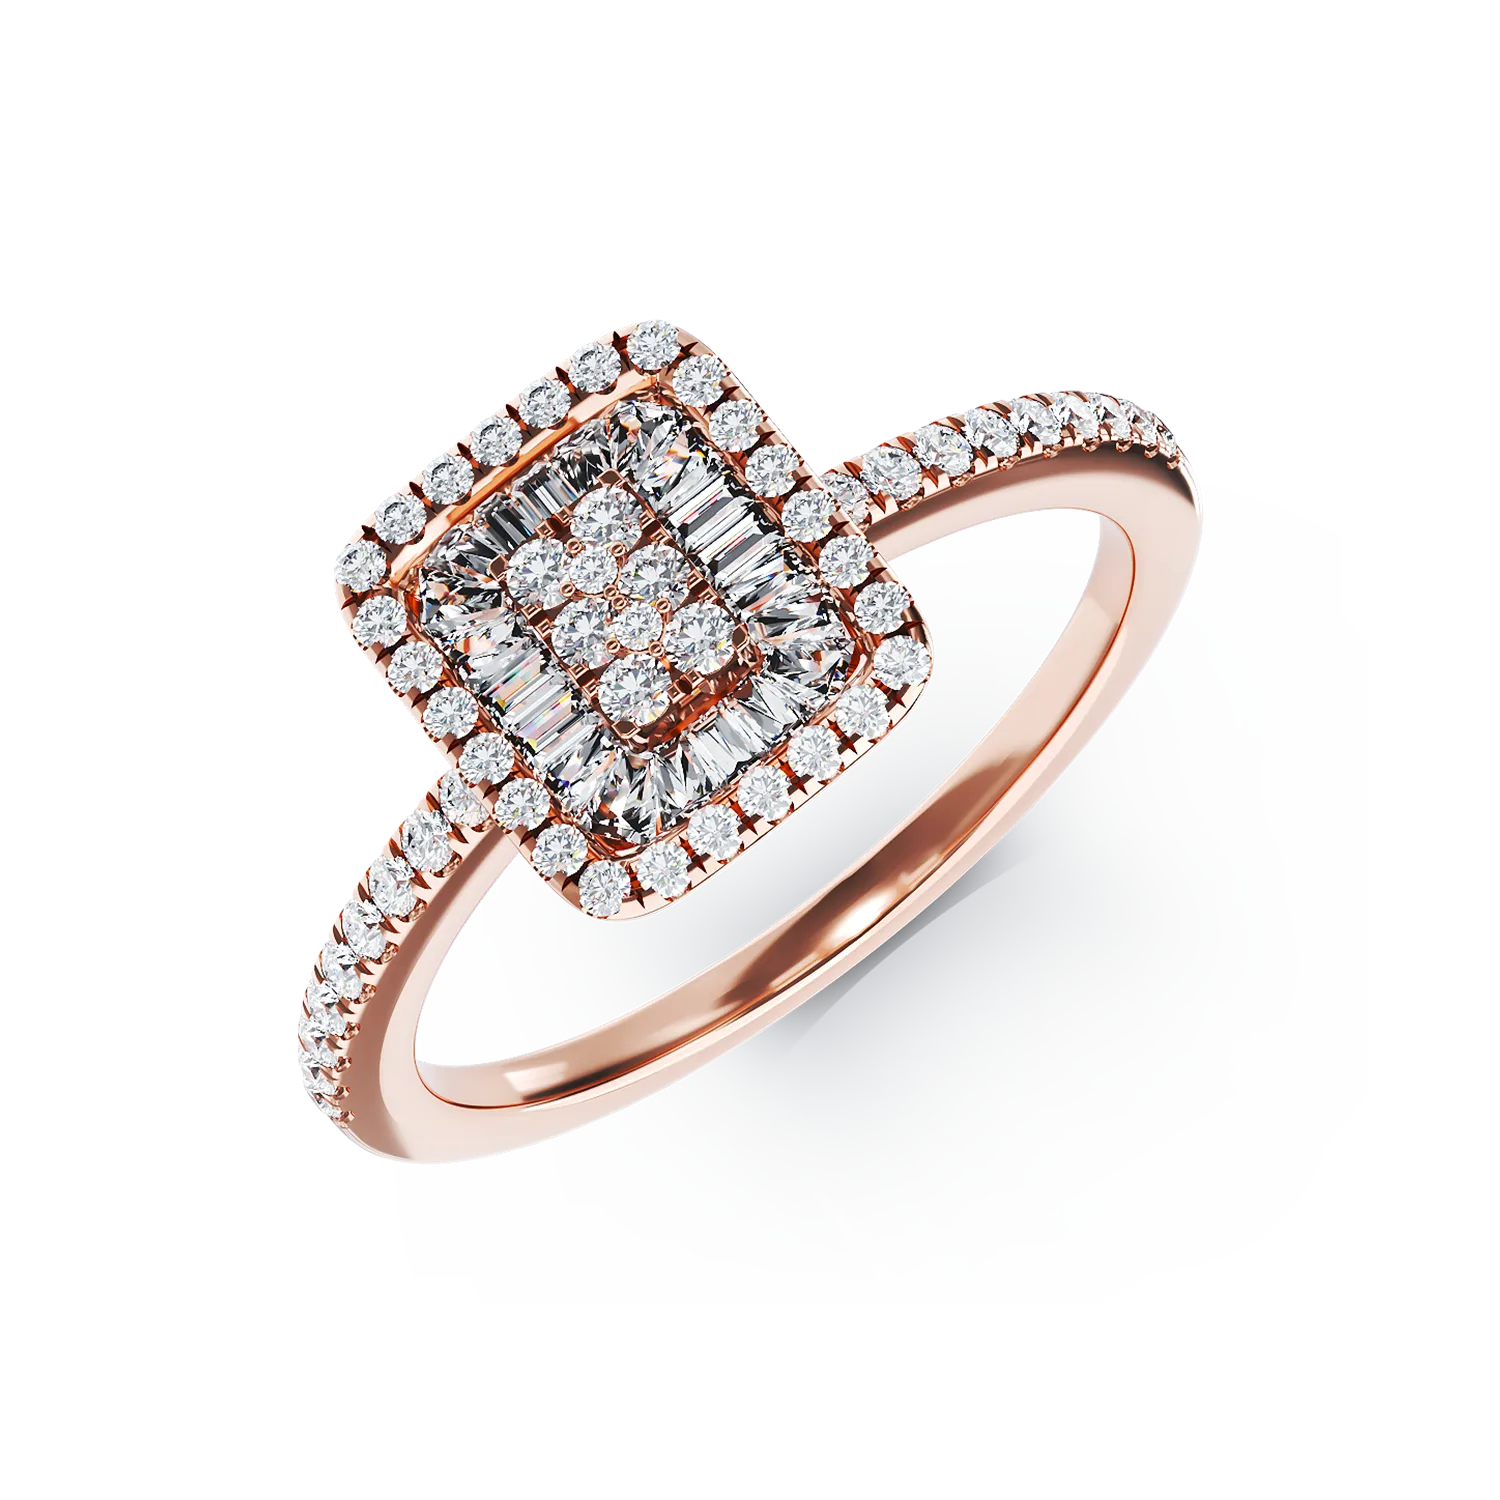 18K rose gold engagement ring with 0.29ct diamonds